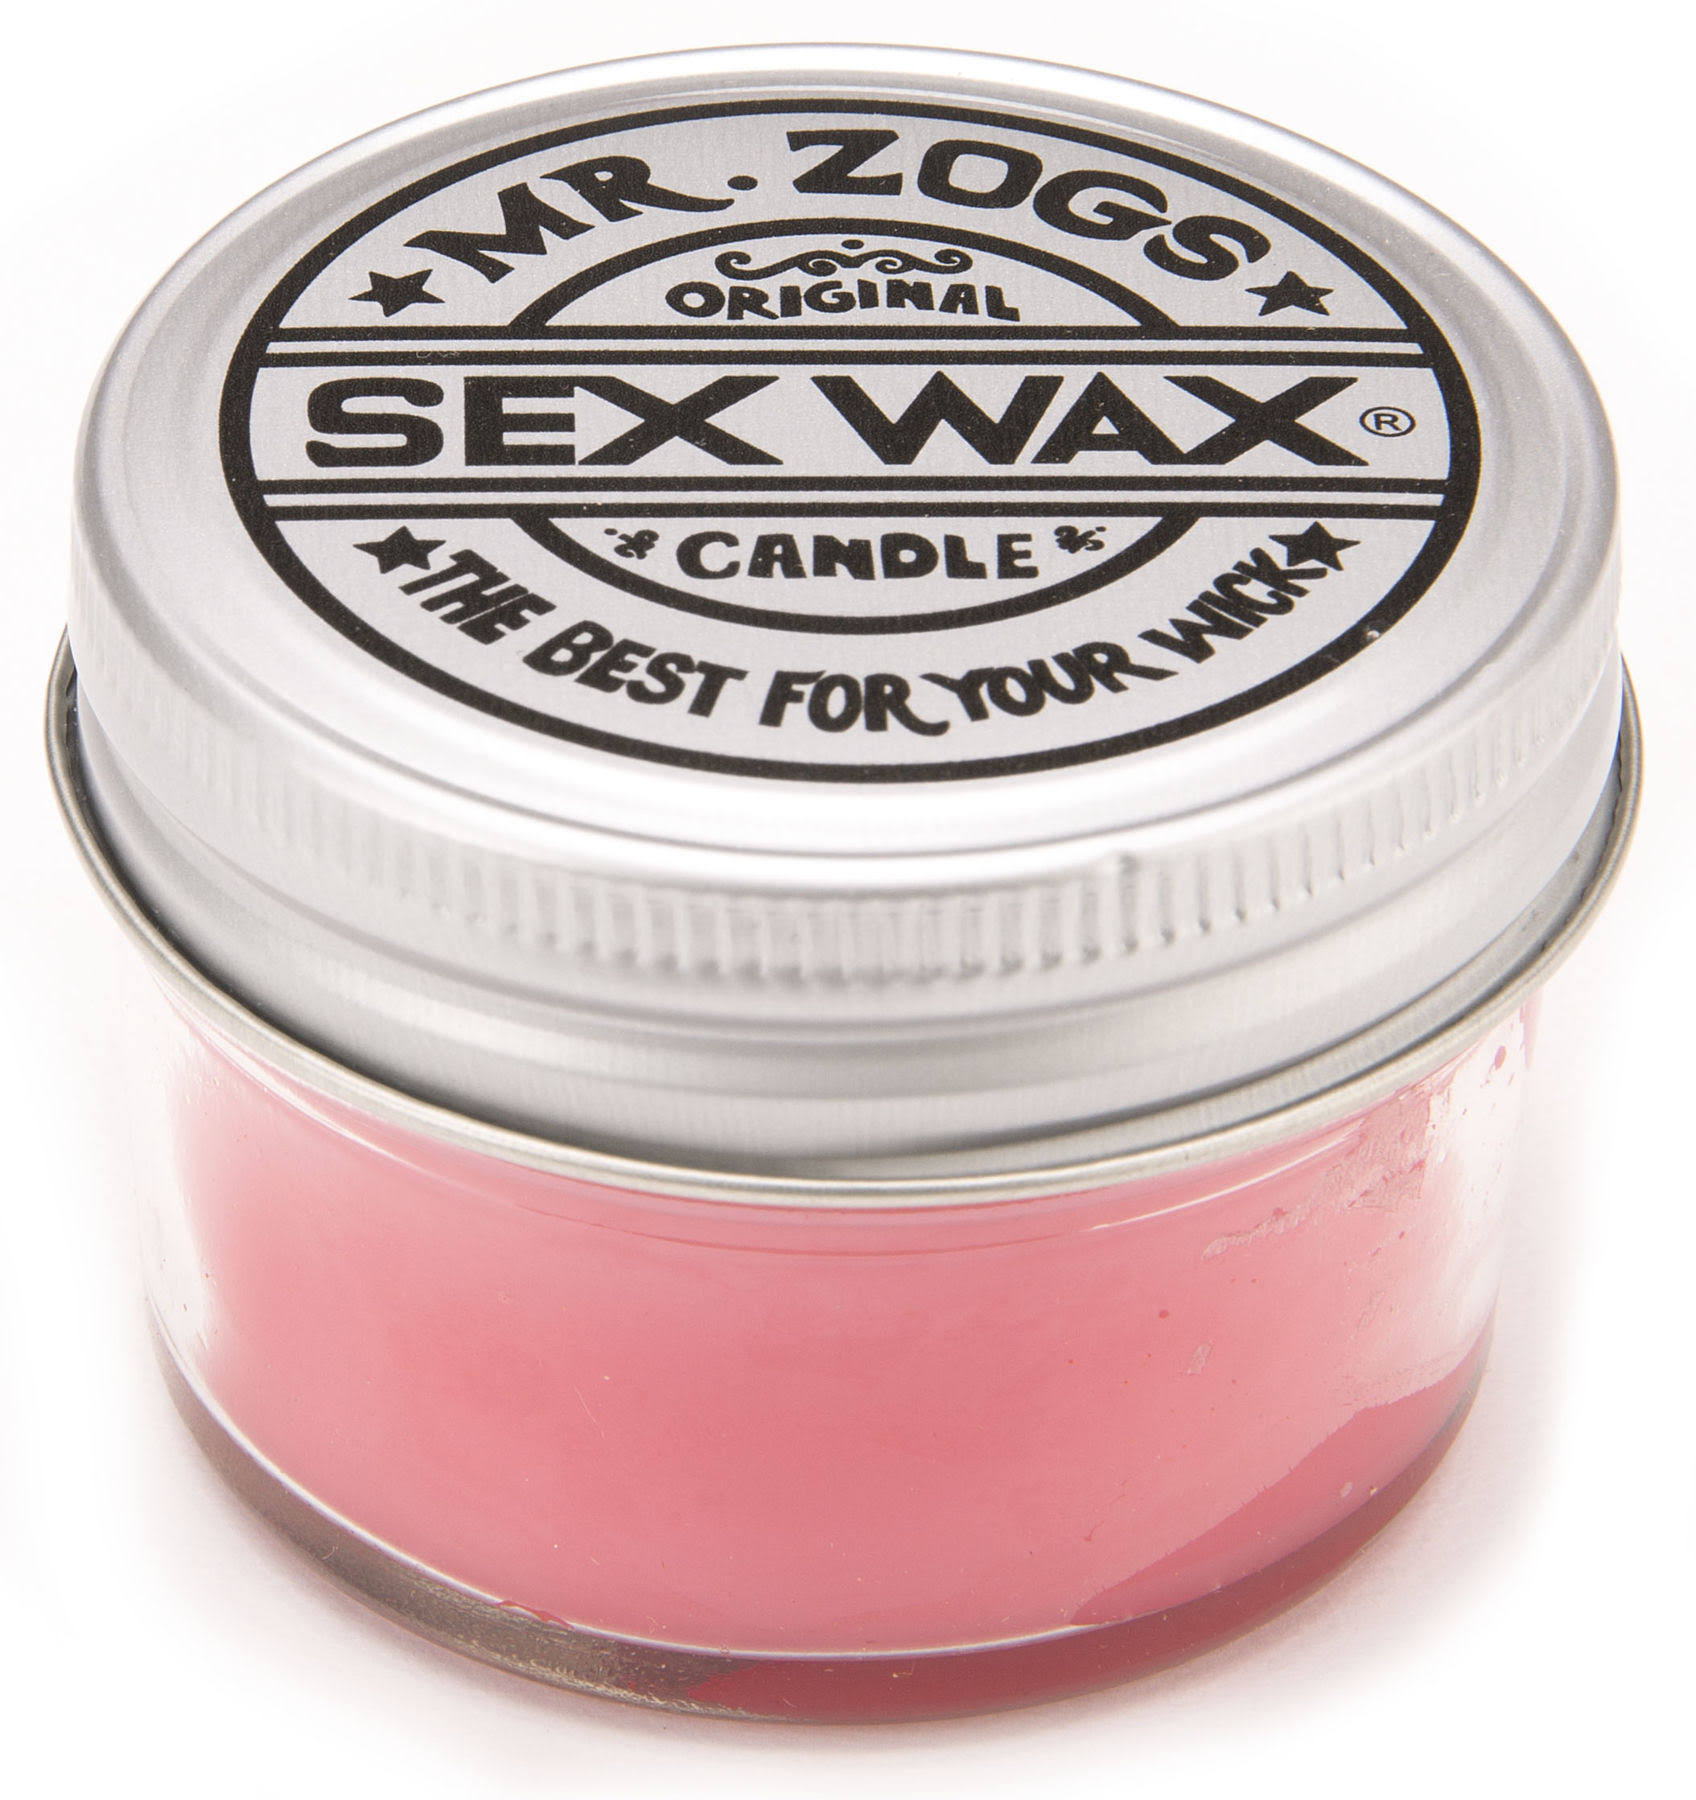 Sexwax Strawberry Scented Candle